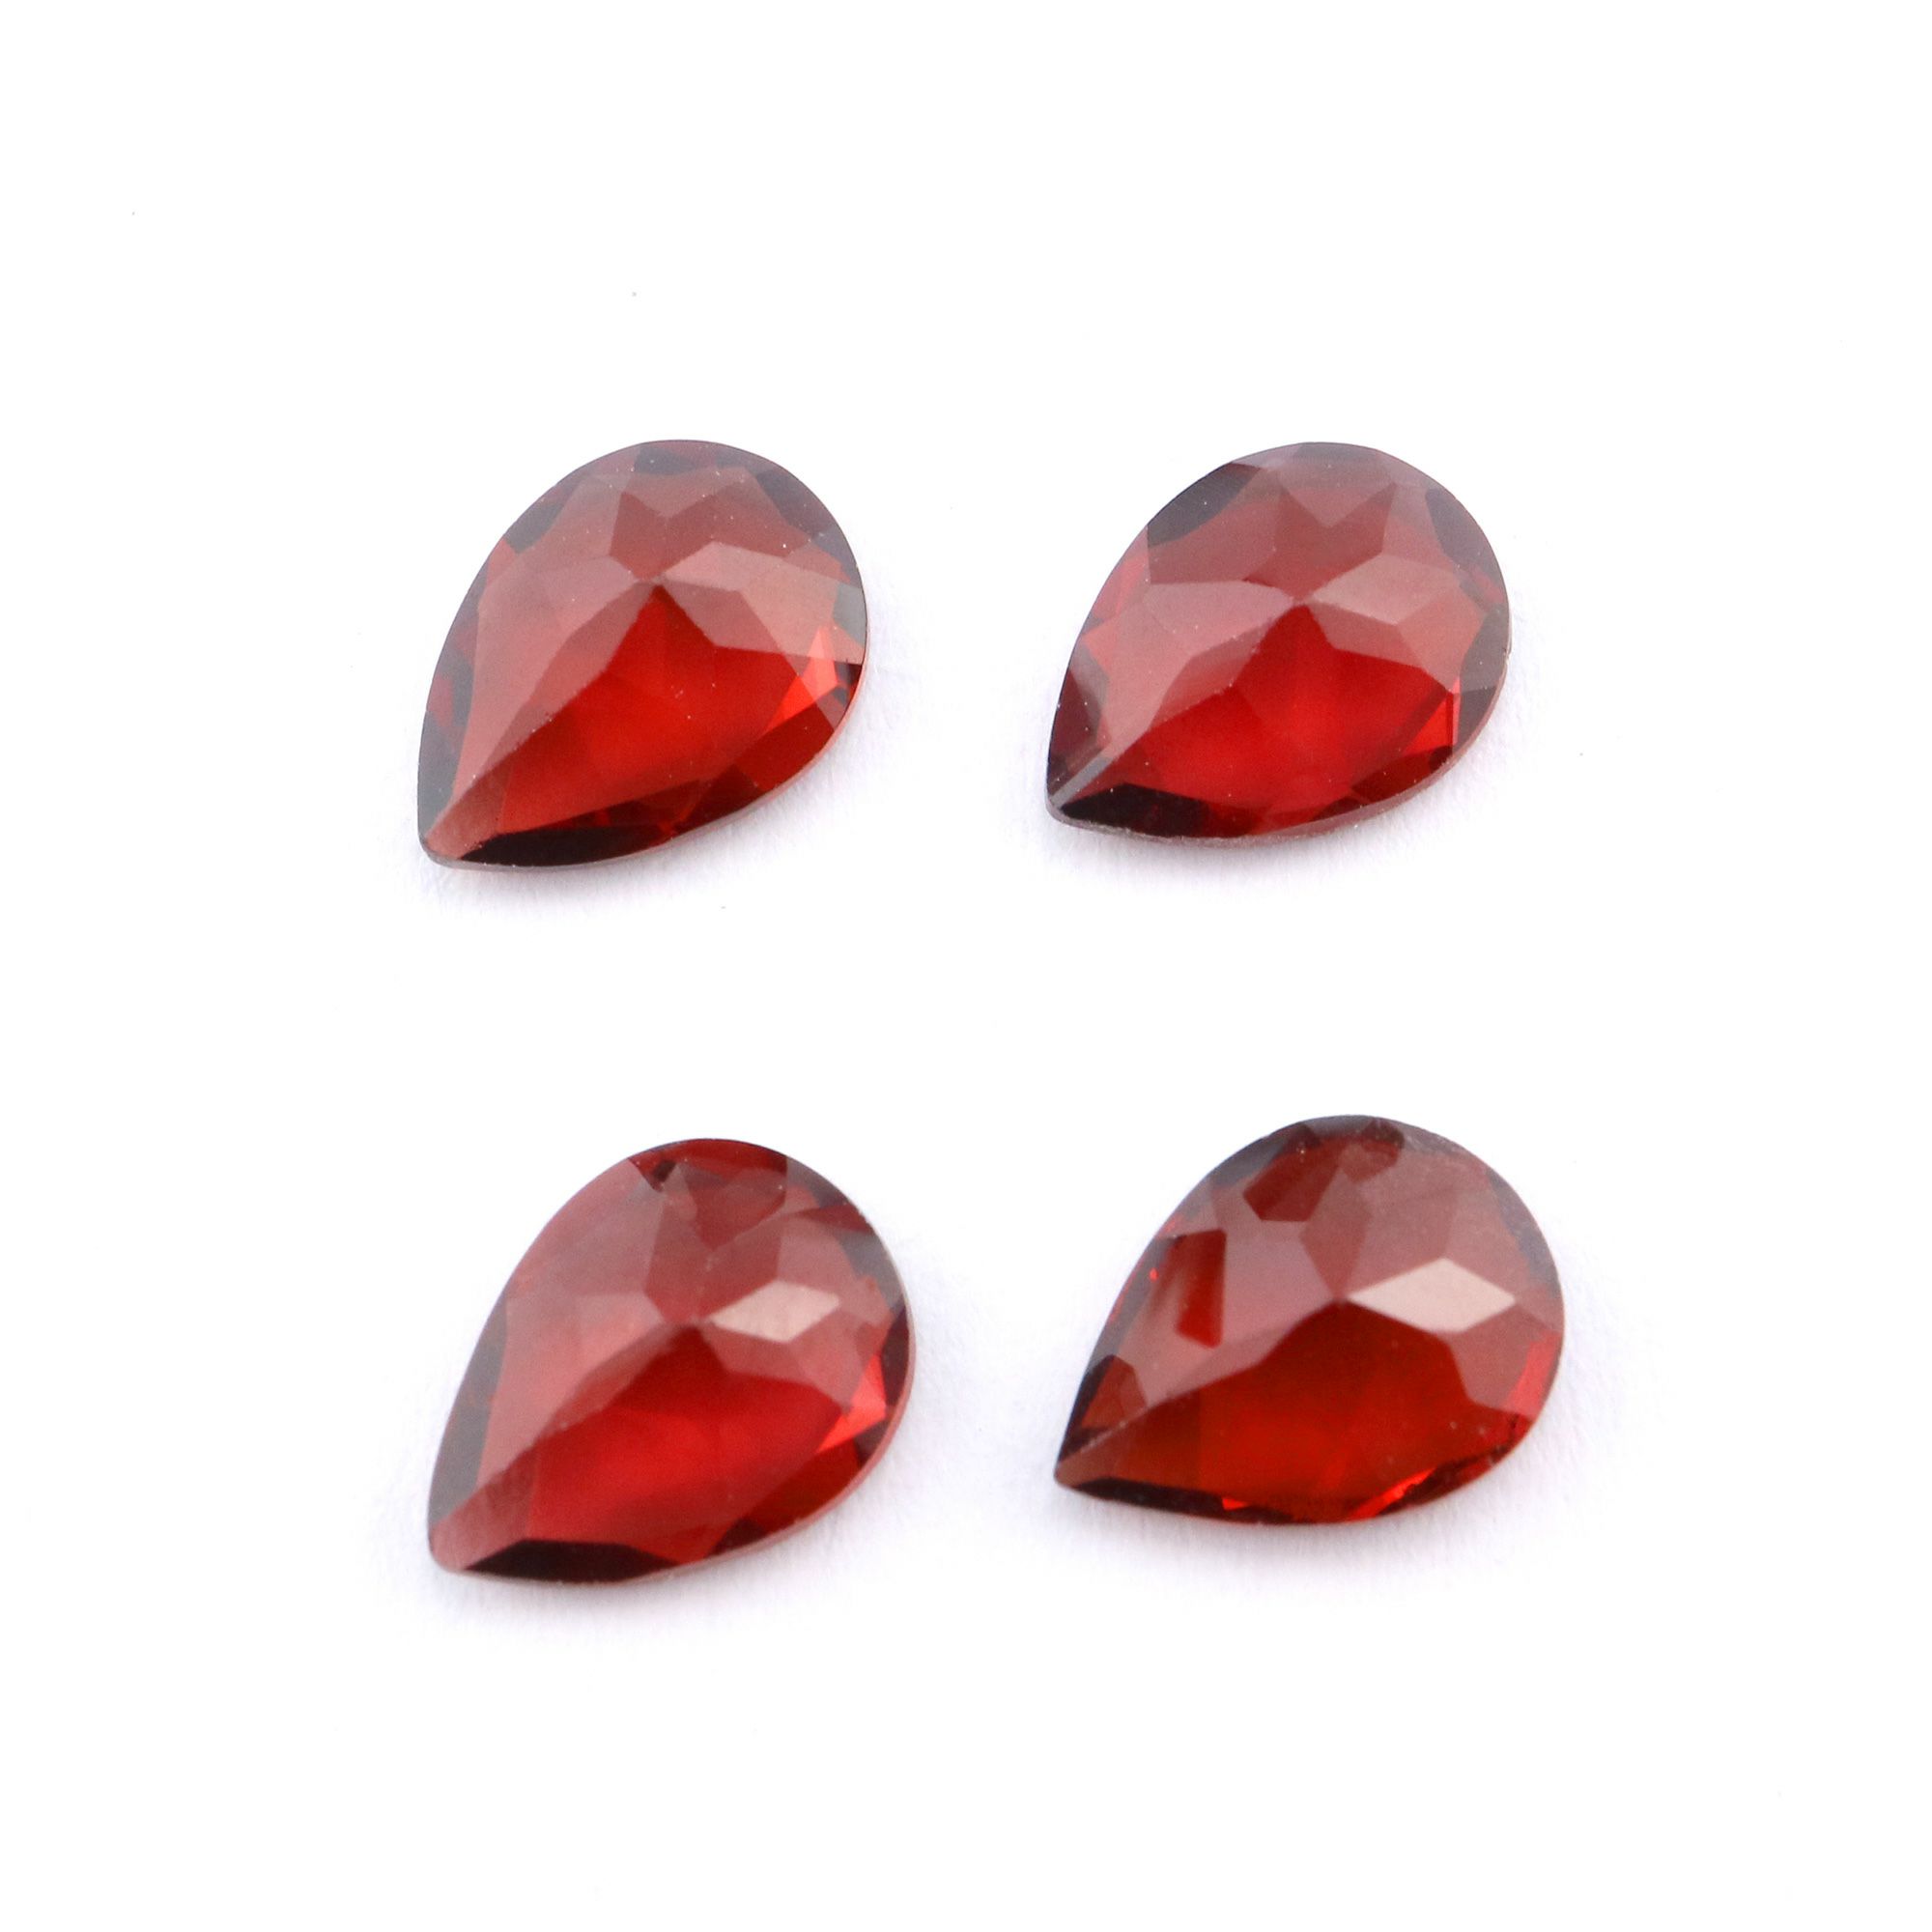 5Pcs Natural Red Garnet January Birthstone Pear Faceted Loose Gemstone Nature Semi Precious Stone DIY Jewelry Supplies 4150010 - Click Image to Close